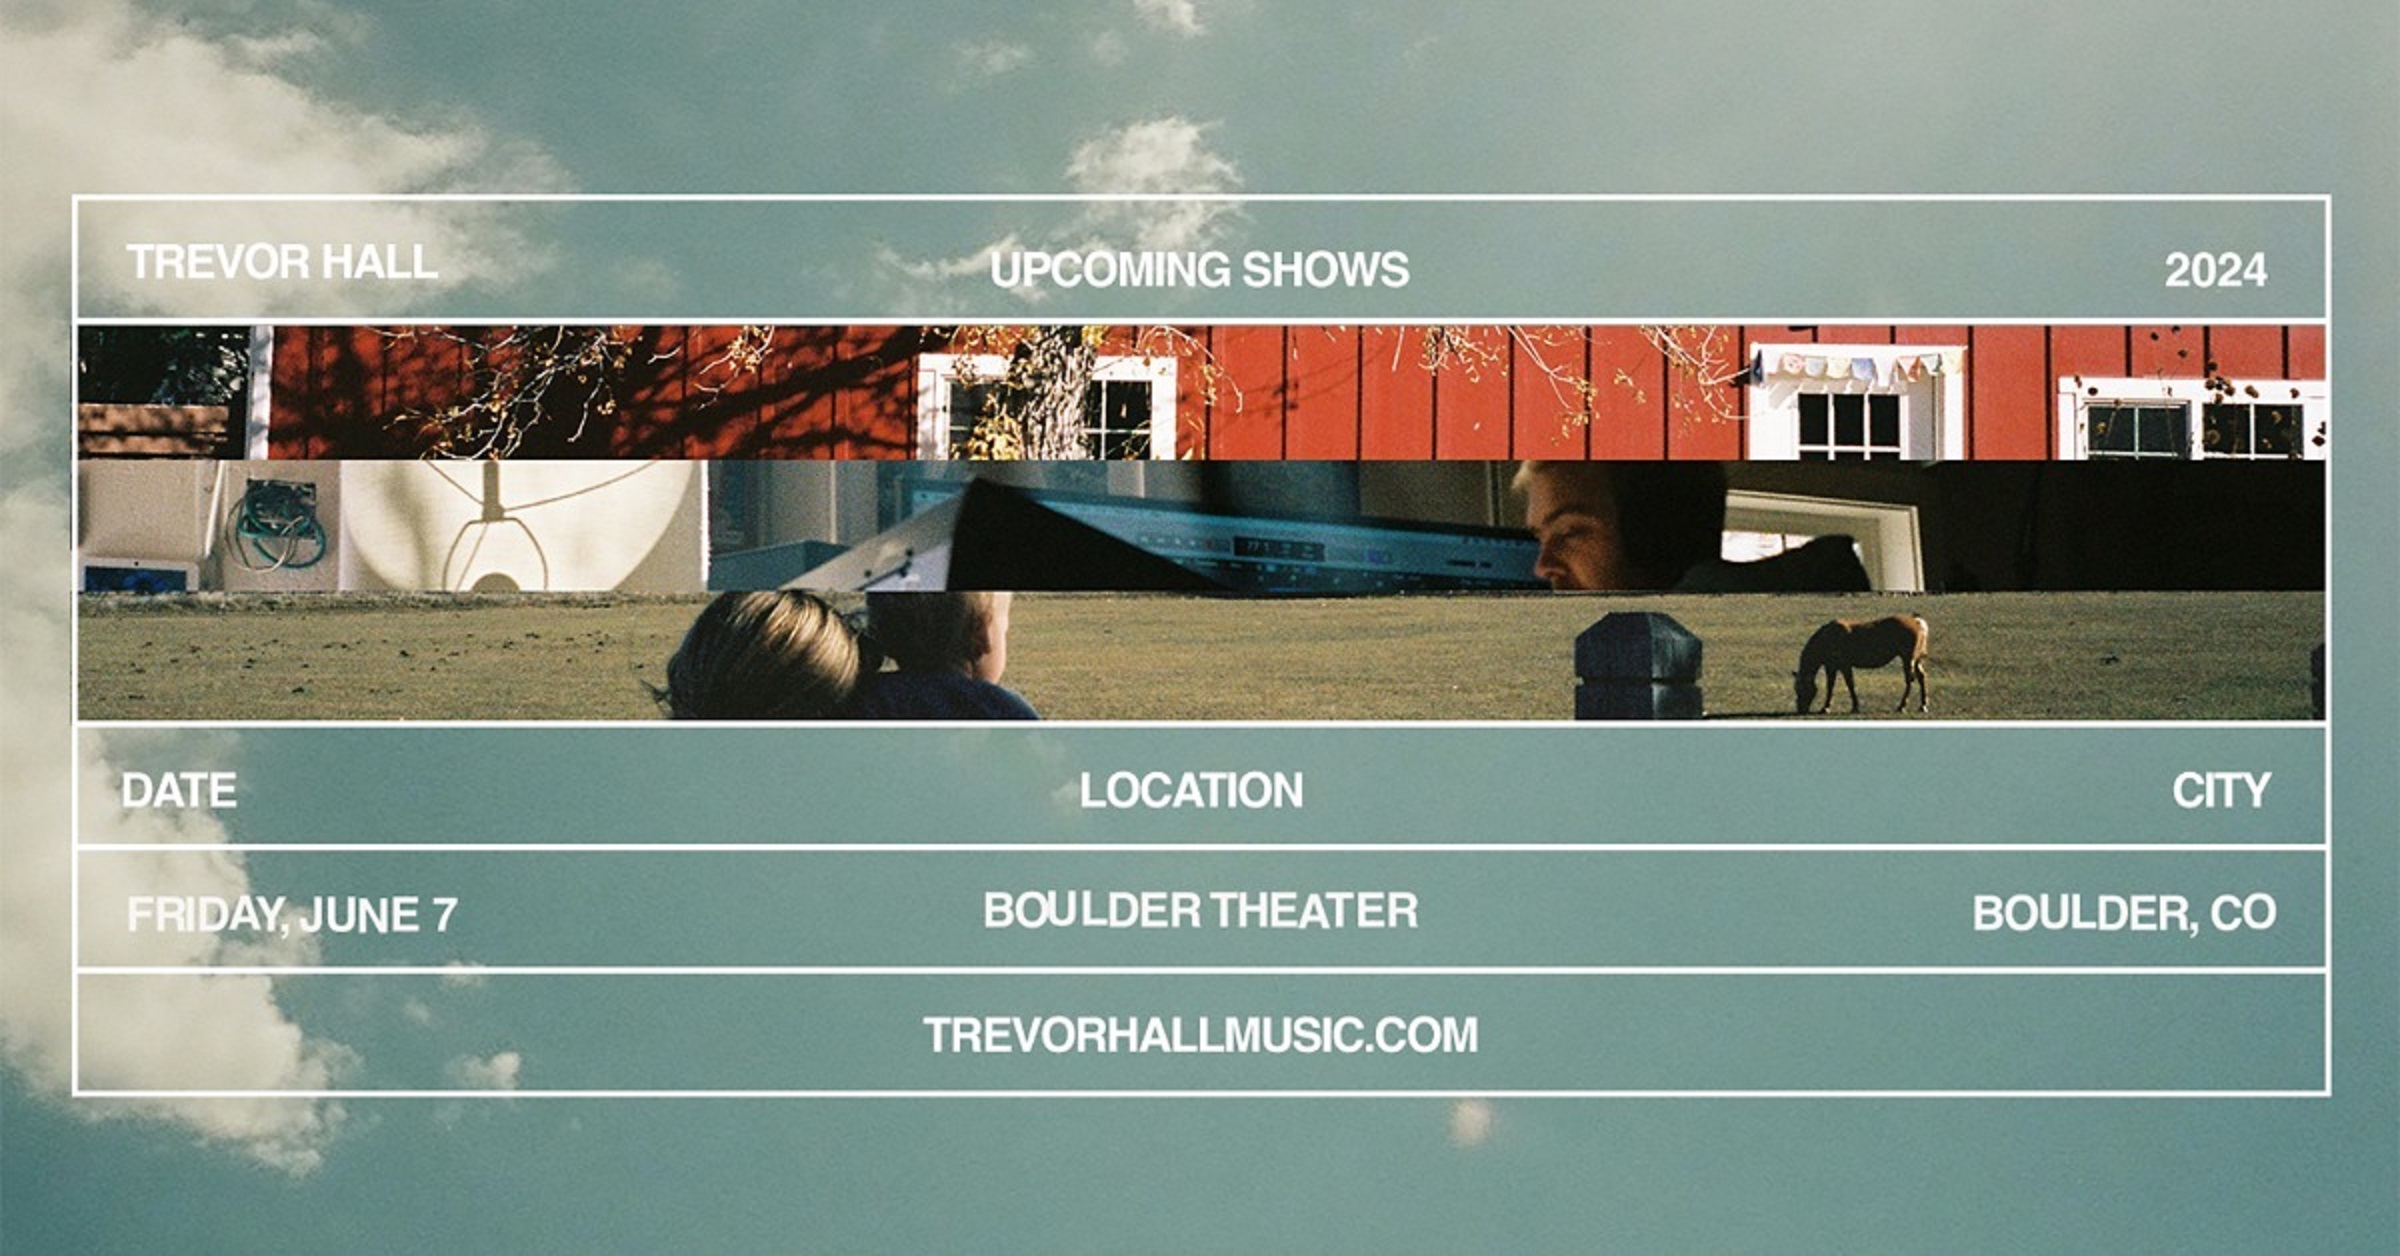 Trevor Hall Announces Celebratory Show at Boulder Theater in Anticipation of His New Album "The Great In-Between"